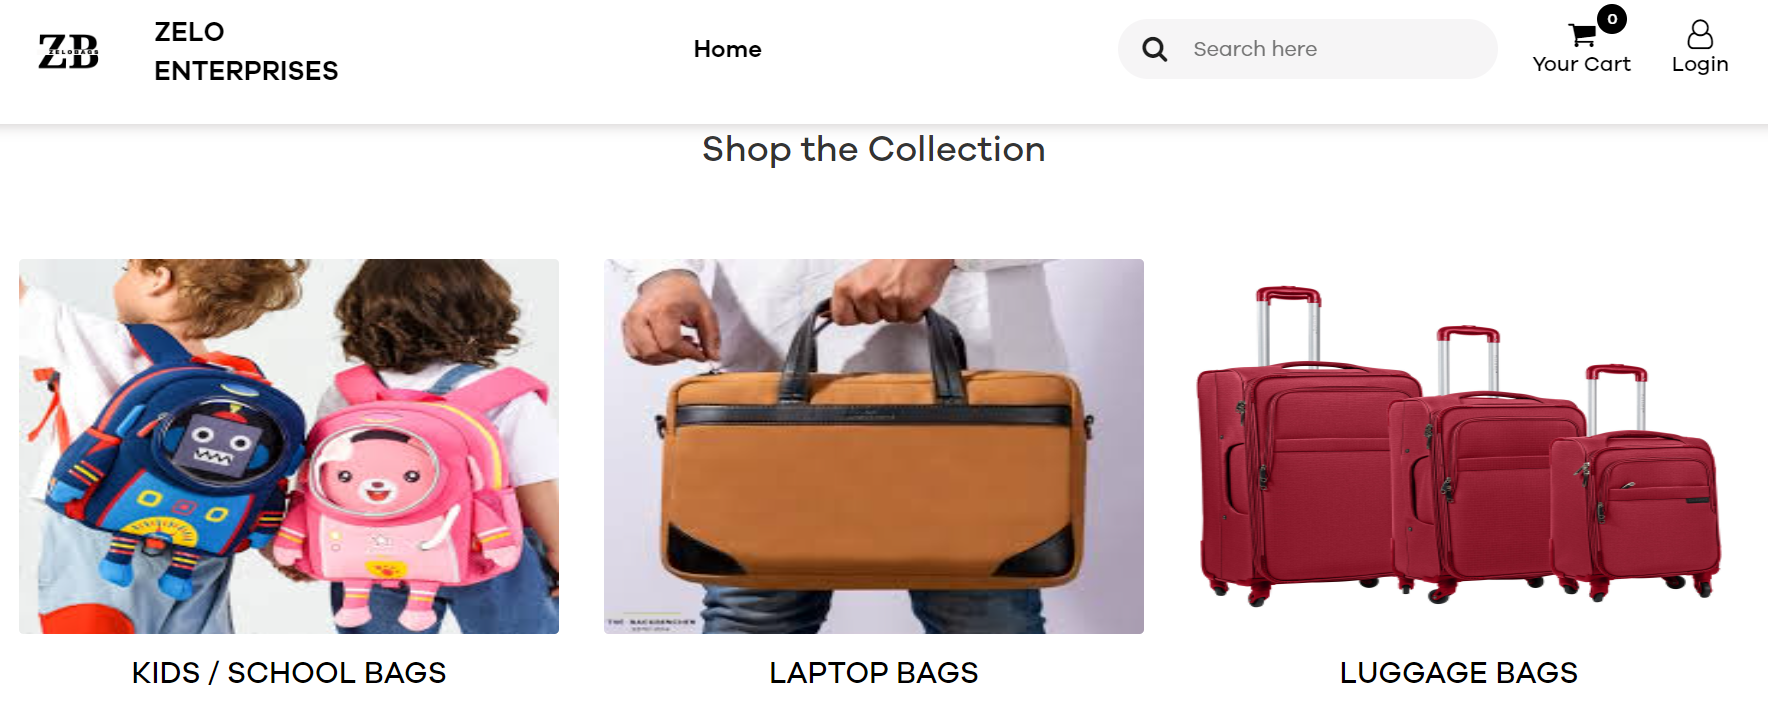 Bags categories online theme Ecommerce